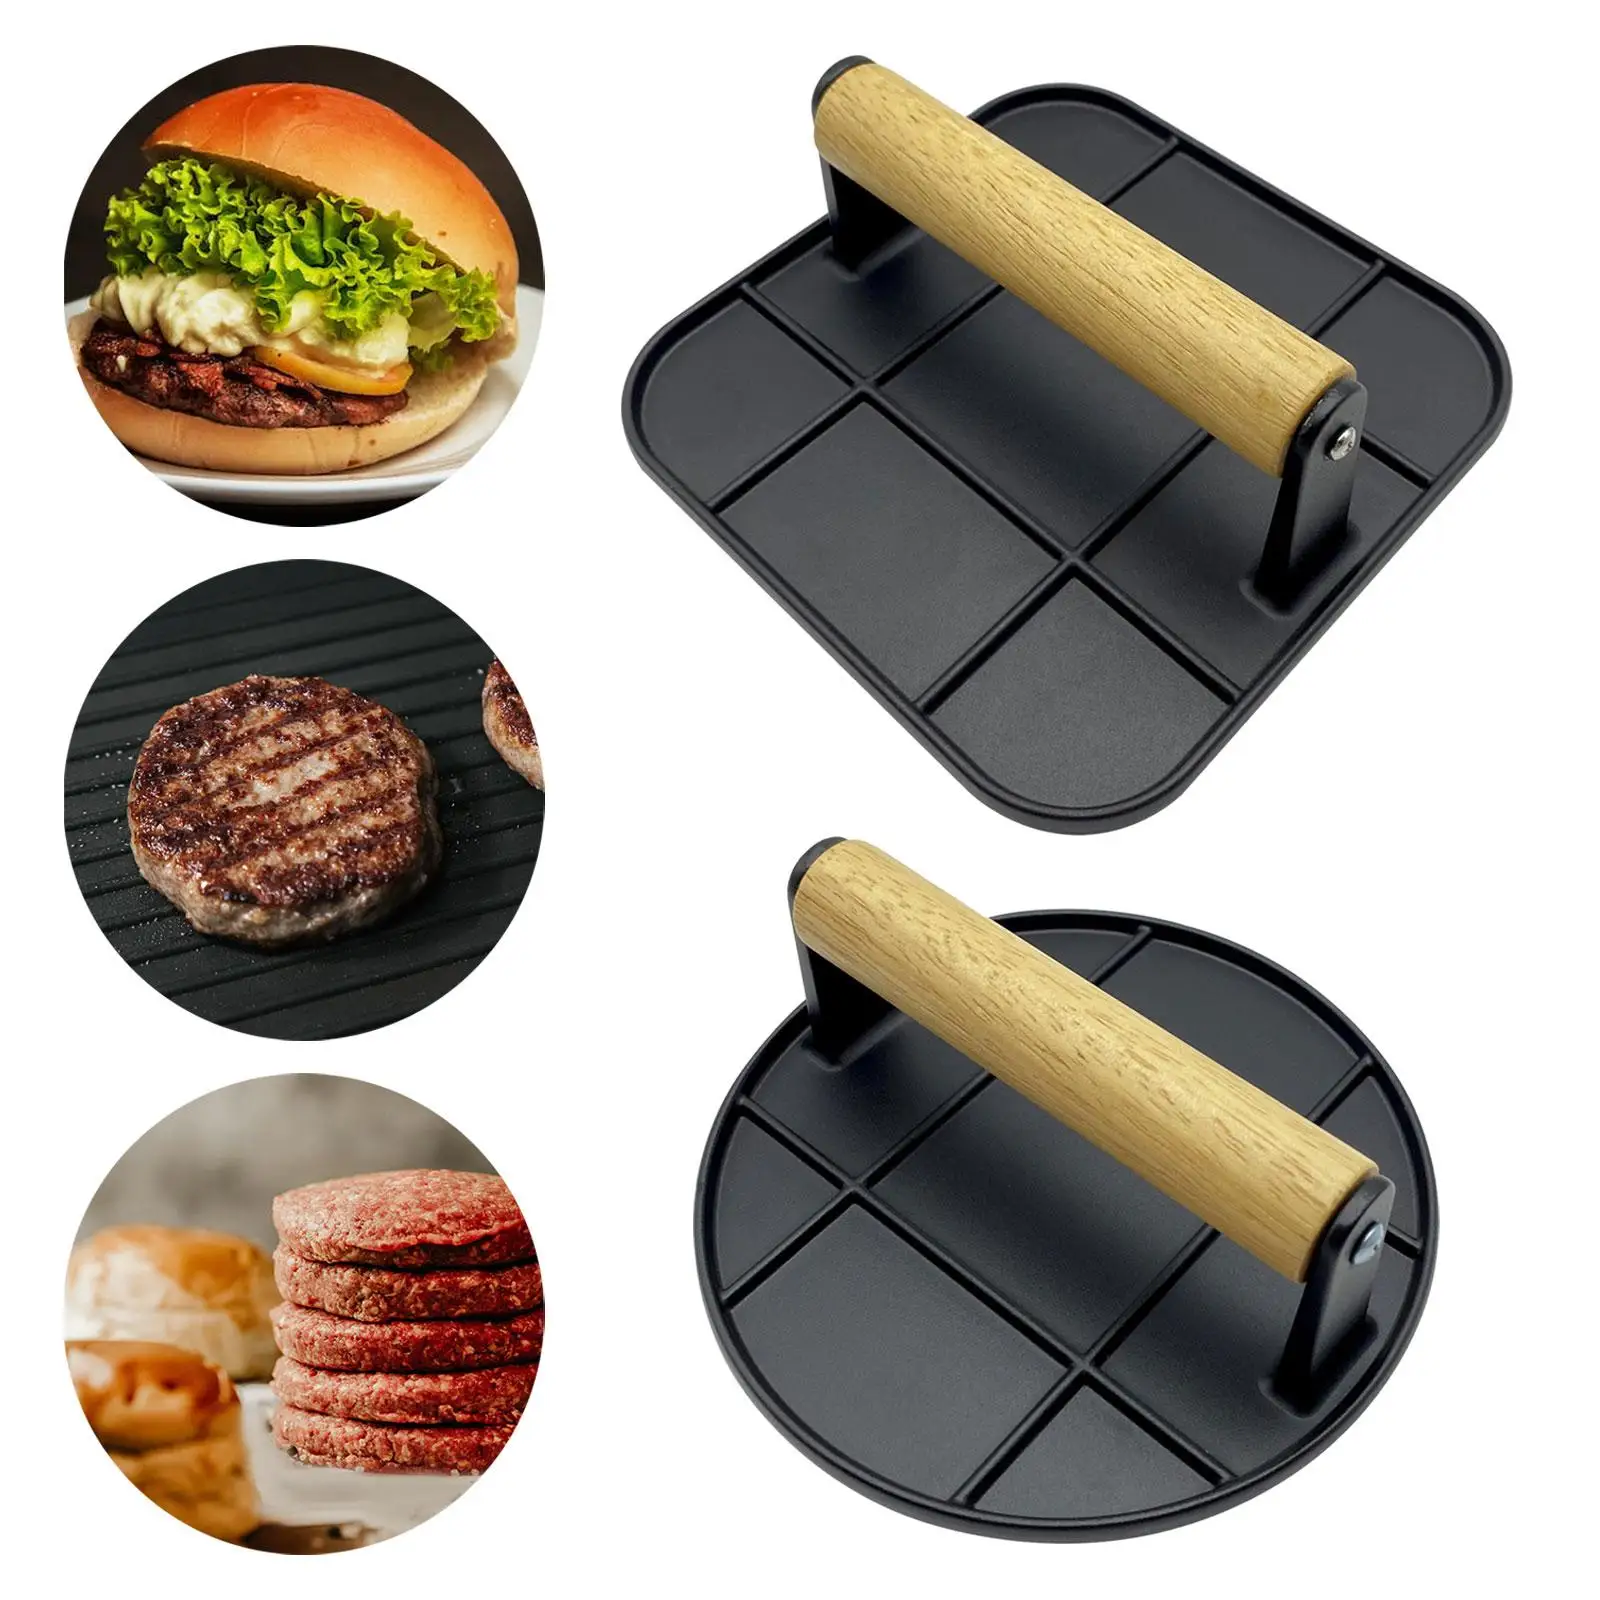 Burger Press Kitchen Gadget Nonstick Grill Press for Meat Grill Cooking